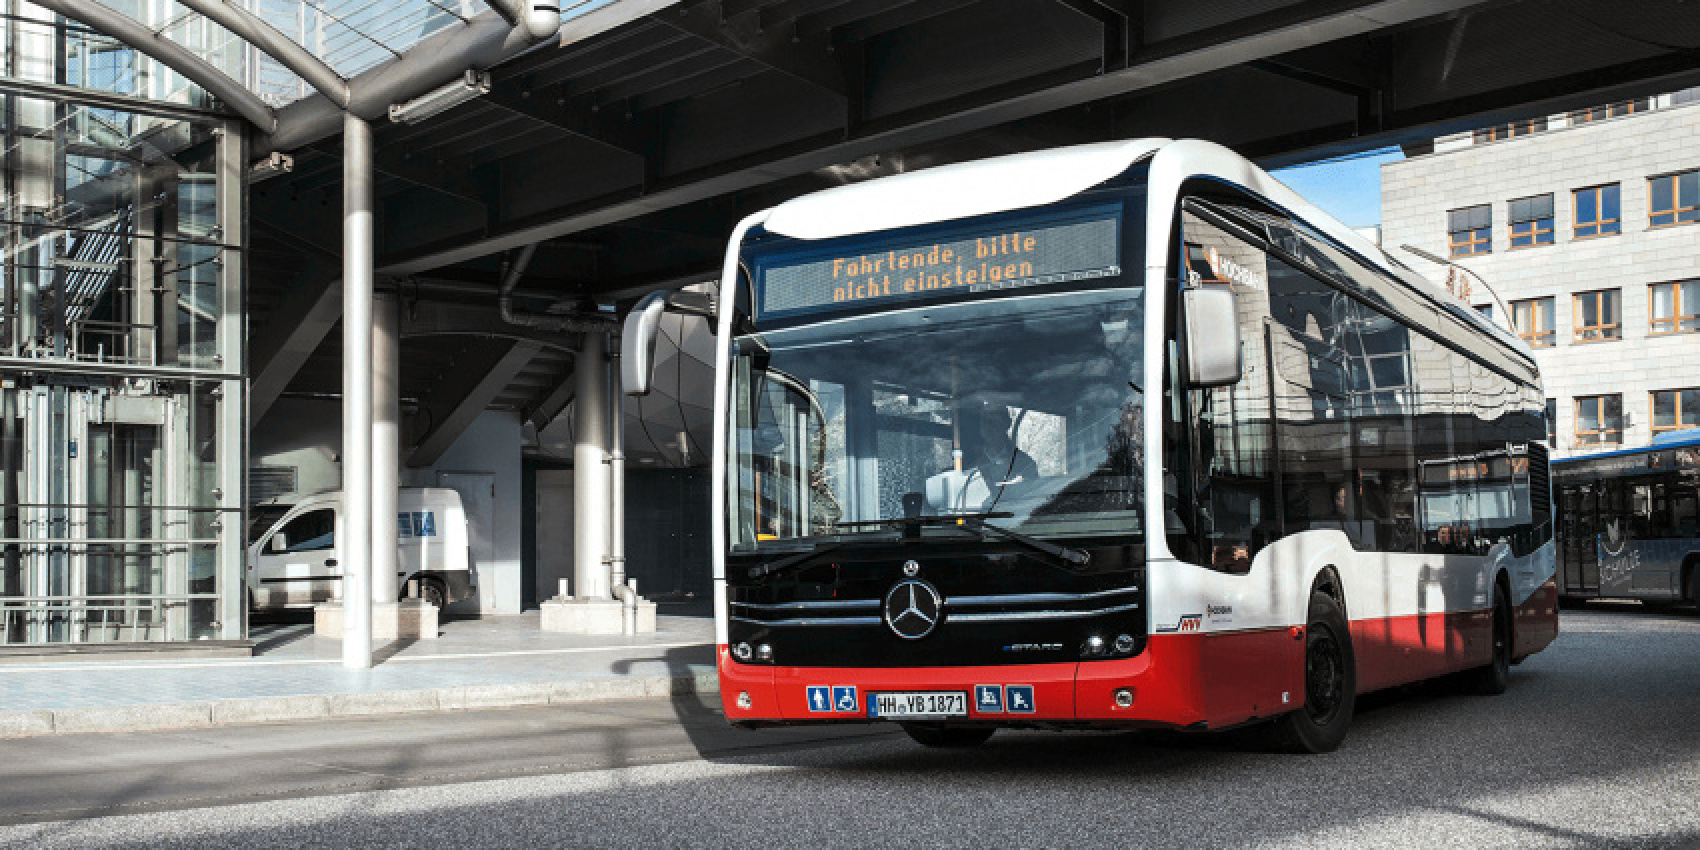 autos, cars, electric vehicle, politics, electric buses, germany, hamburg, hamburger hochbahn, public transport, subsidies, germany funds 472 new electric buses for hamburg